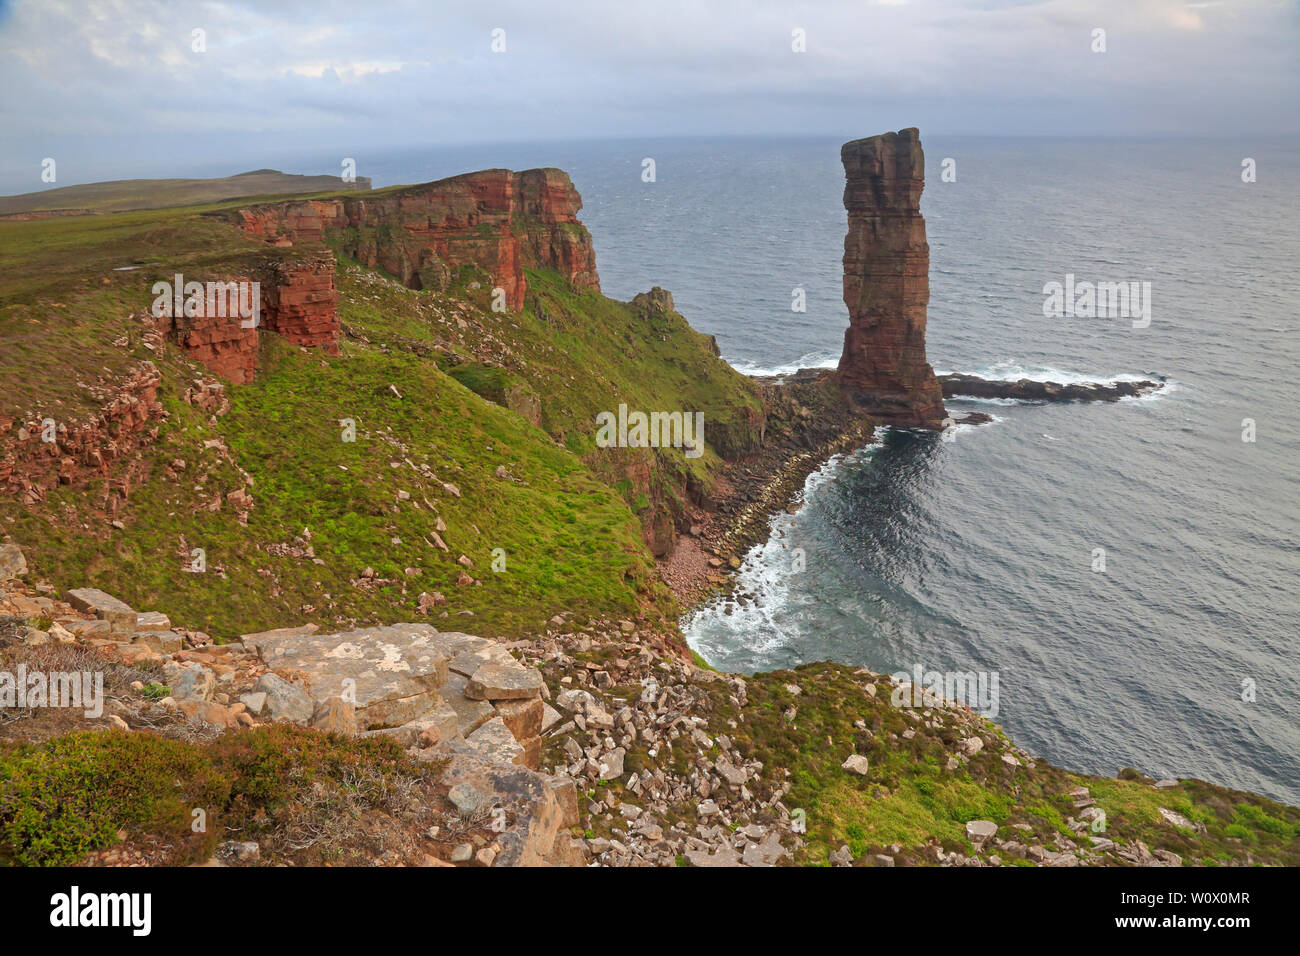 View of the Old Man of Hoy from the land Stock Photo